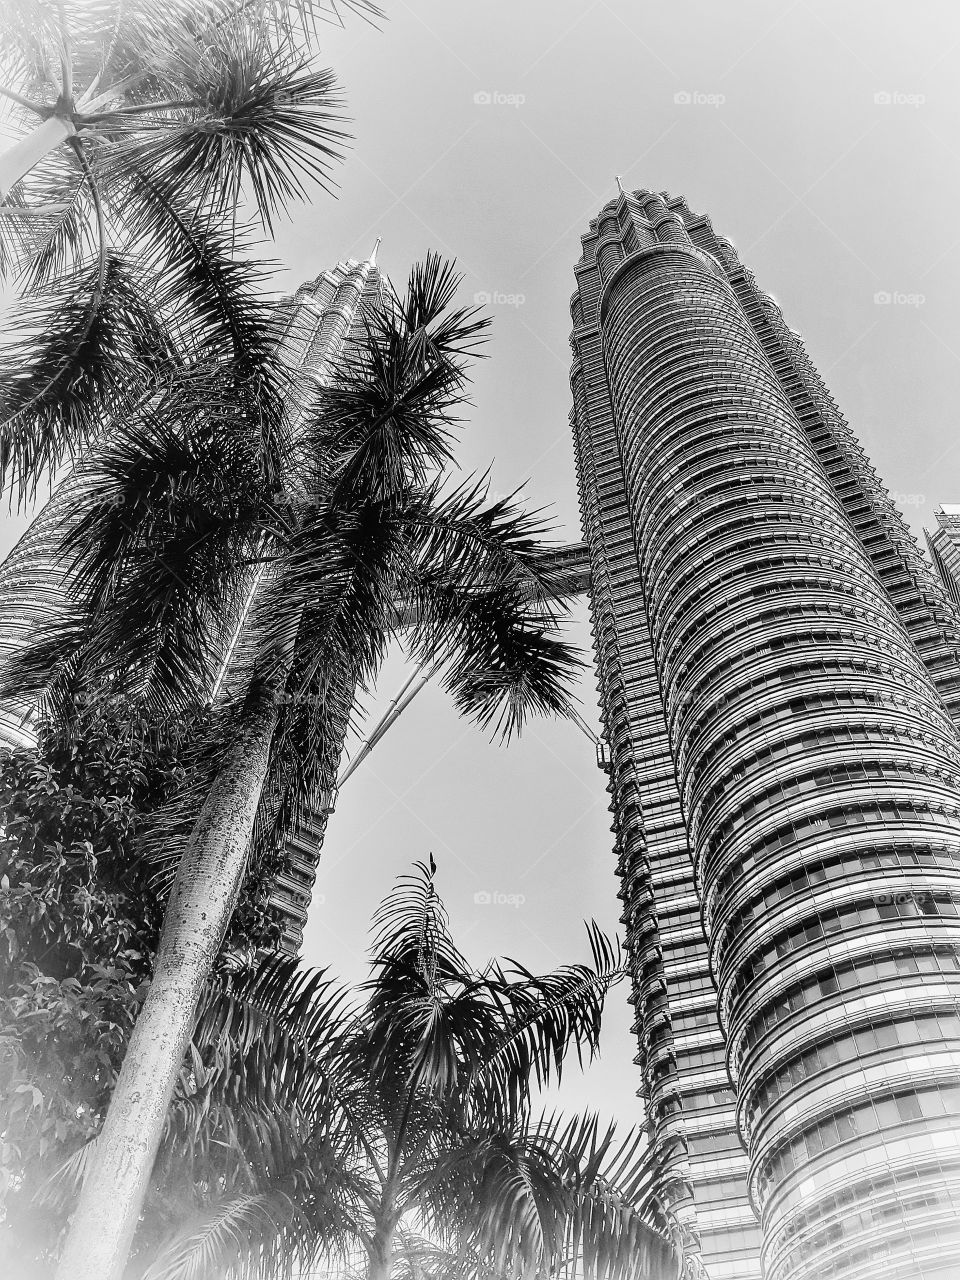 KLCC Tower in Classic view